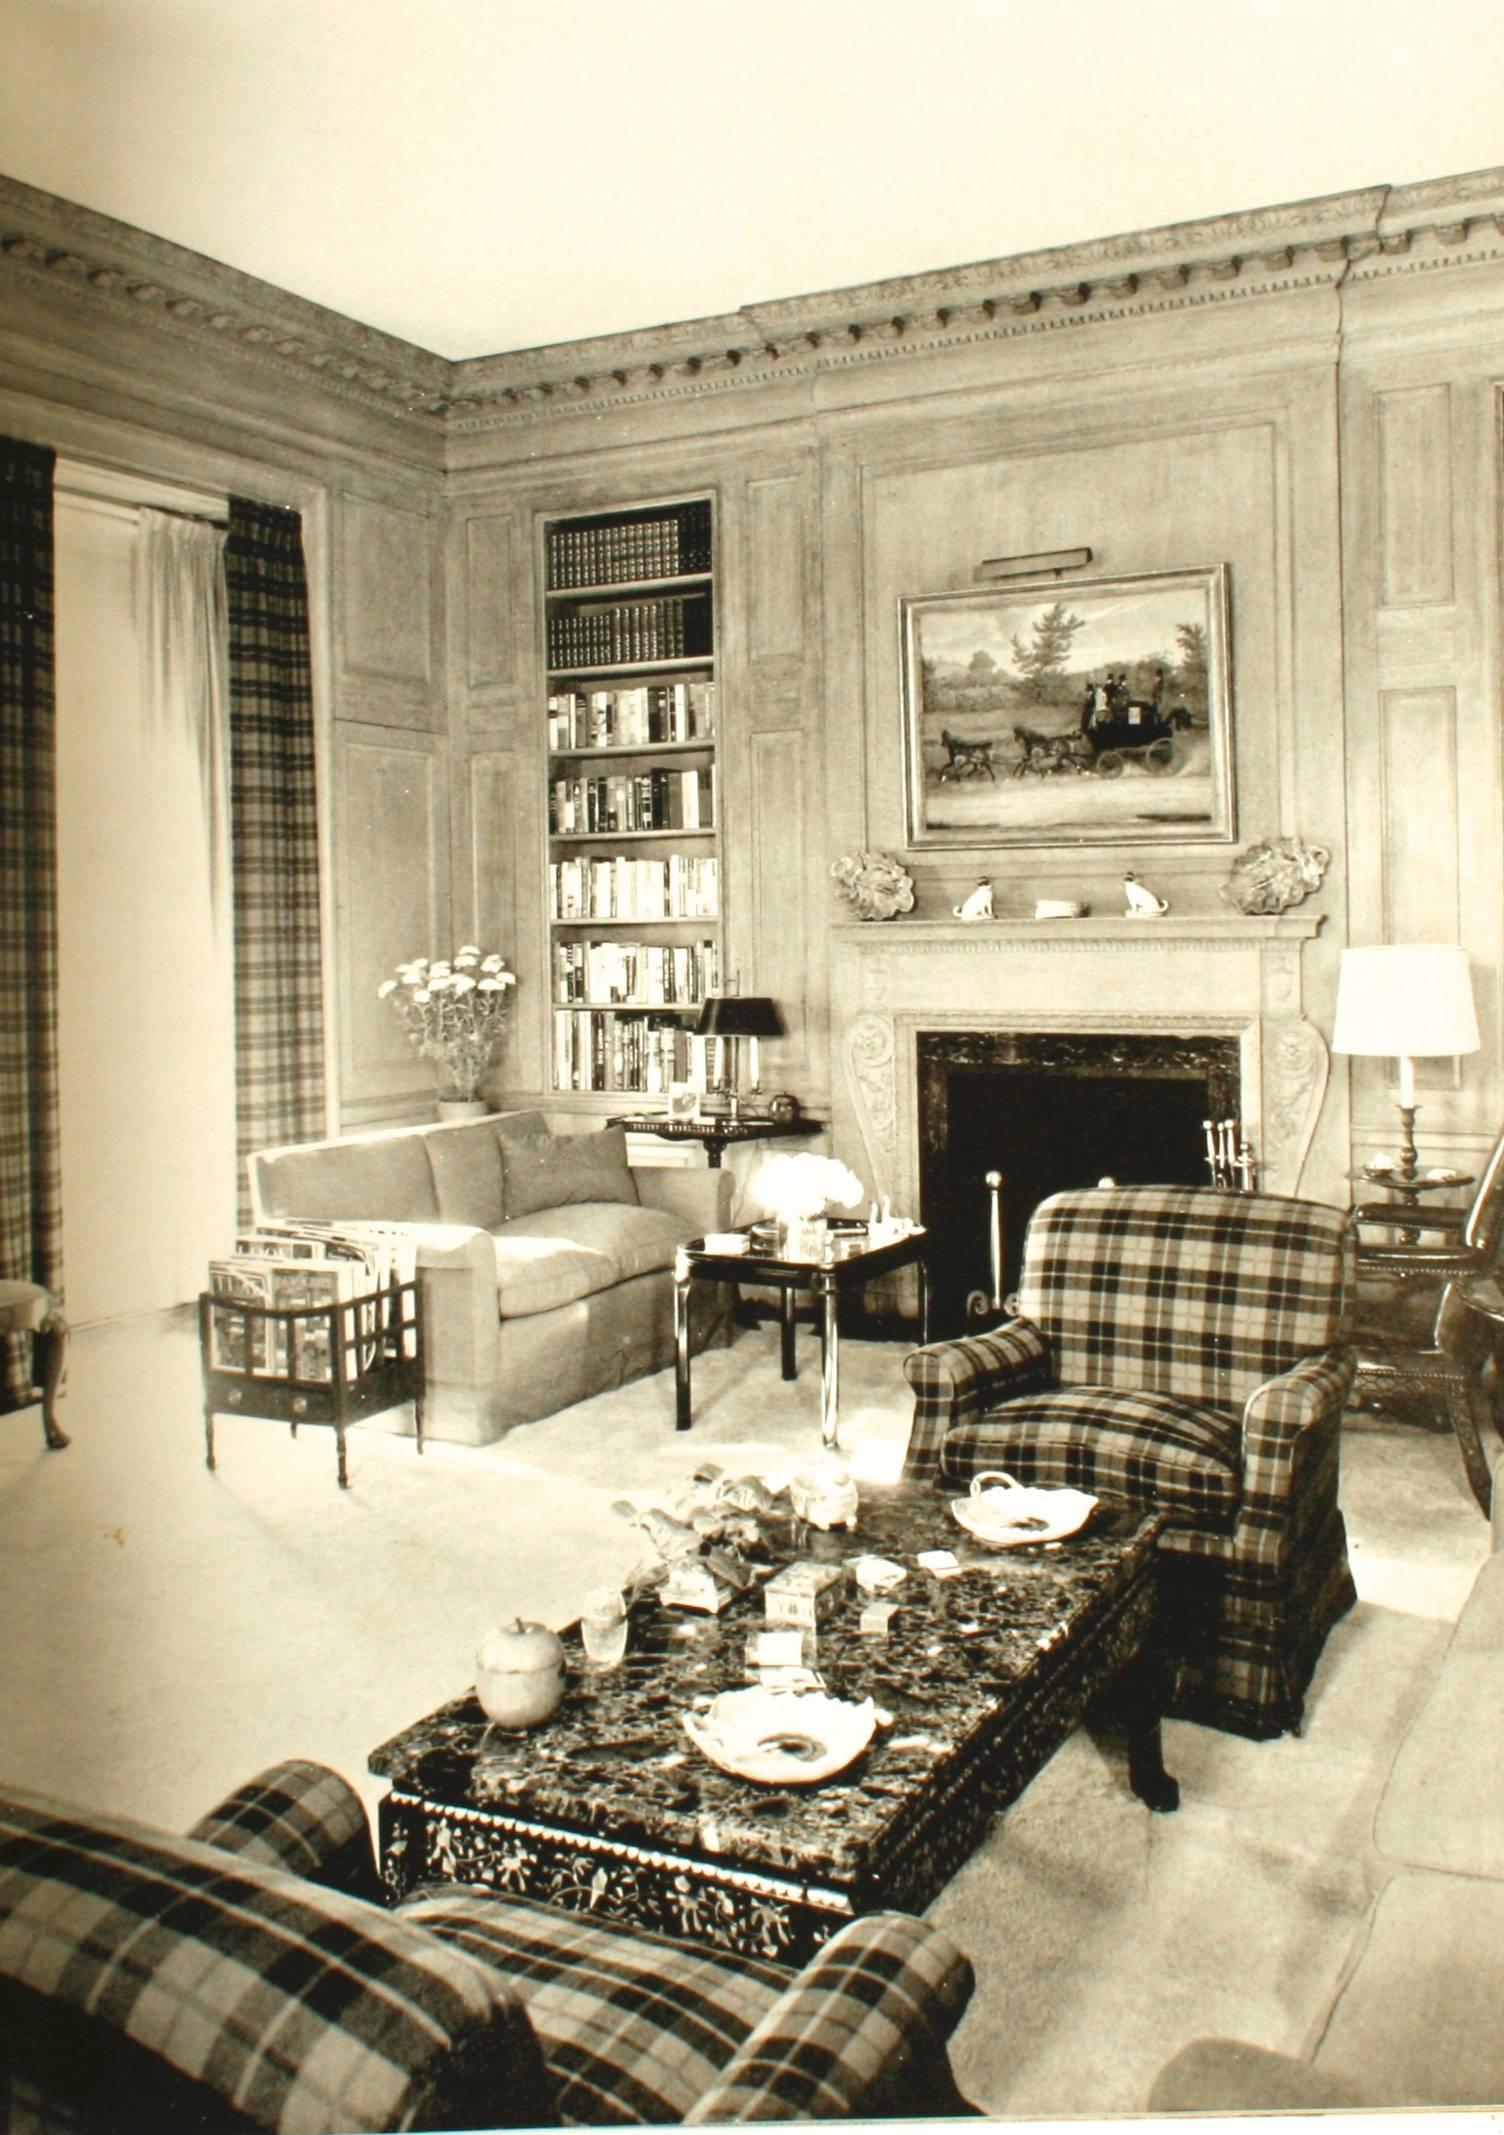 The finest Rooms by America's Great Decorators by Katharine Tweed, New York: The Viking Press, Inc. First edition hardcover with dust jacket, 1964. 168 pp. A retrospective of some of Americas past interior designers including Billy Baldwin, Tate and